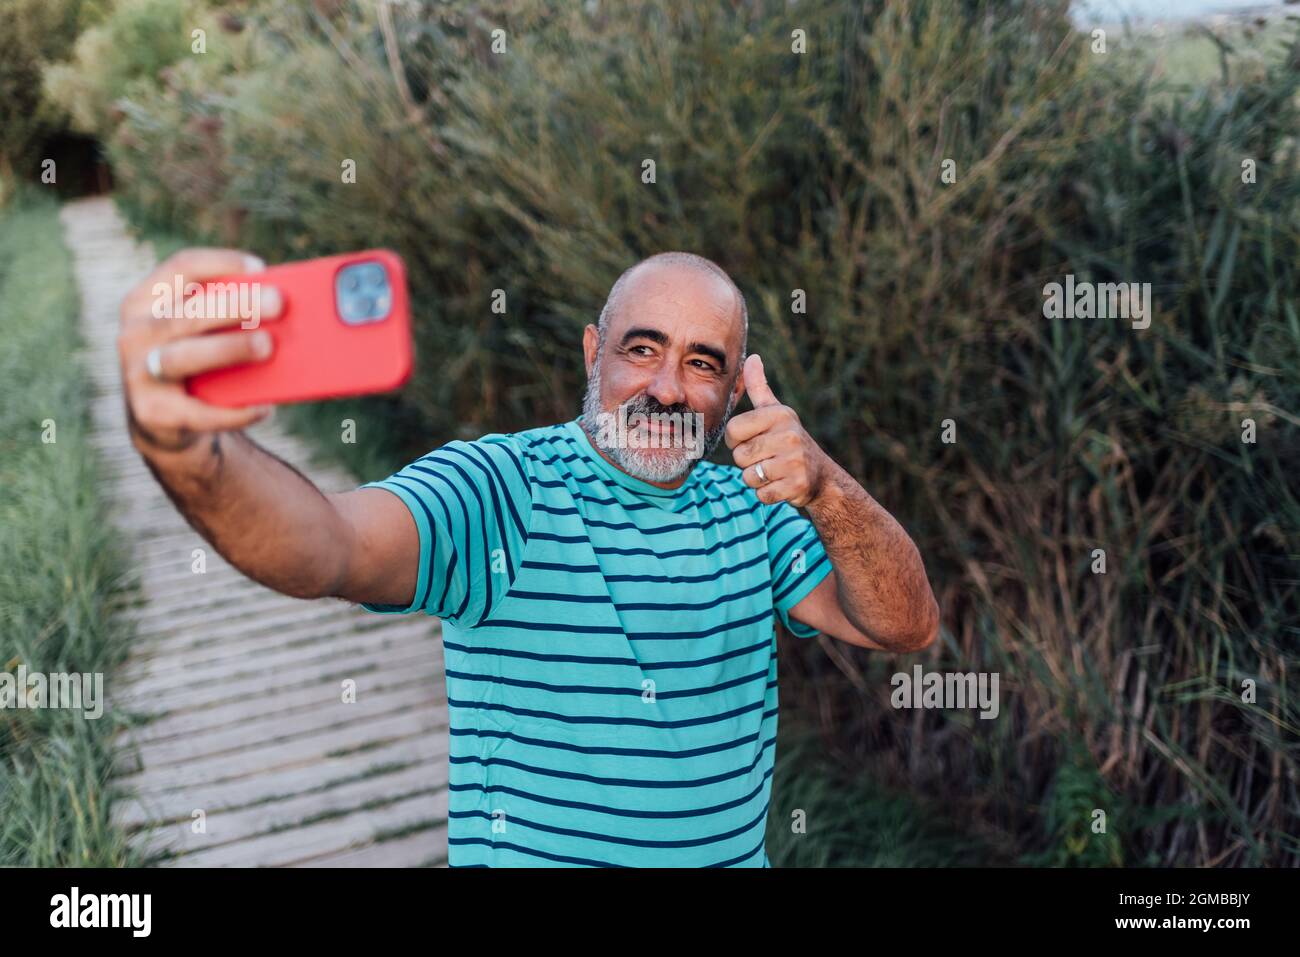 Happy middle-aged man showing thumb up while taking a selfie with a mobile phone outdoors in the nature. Stock Photo